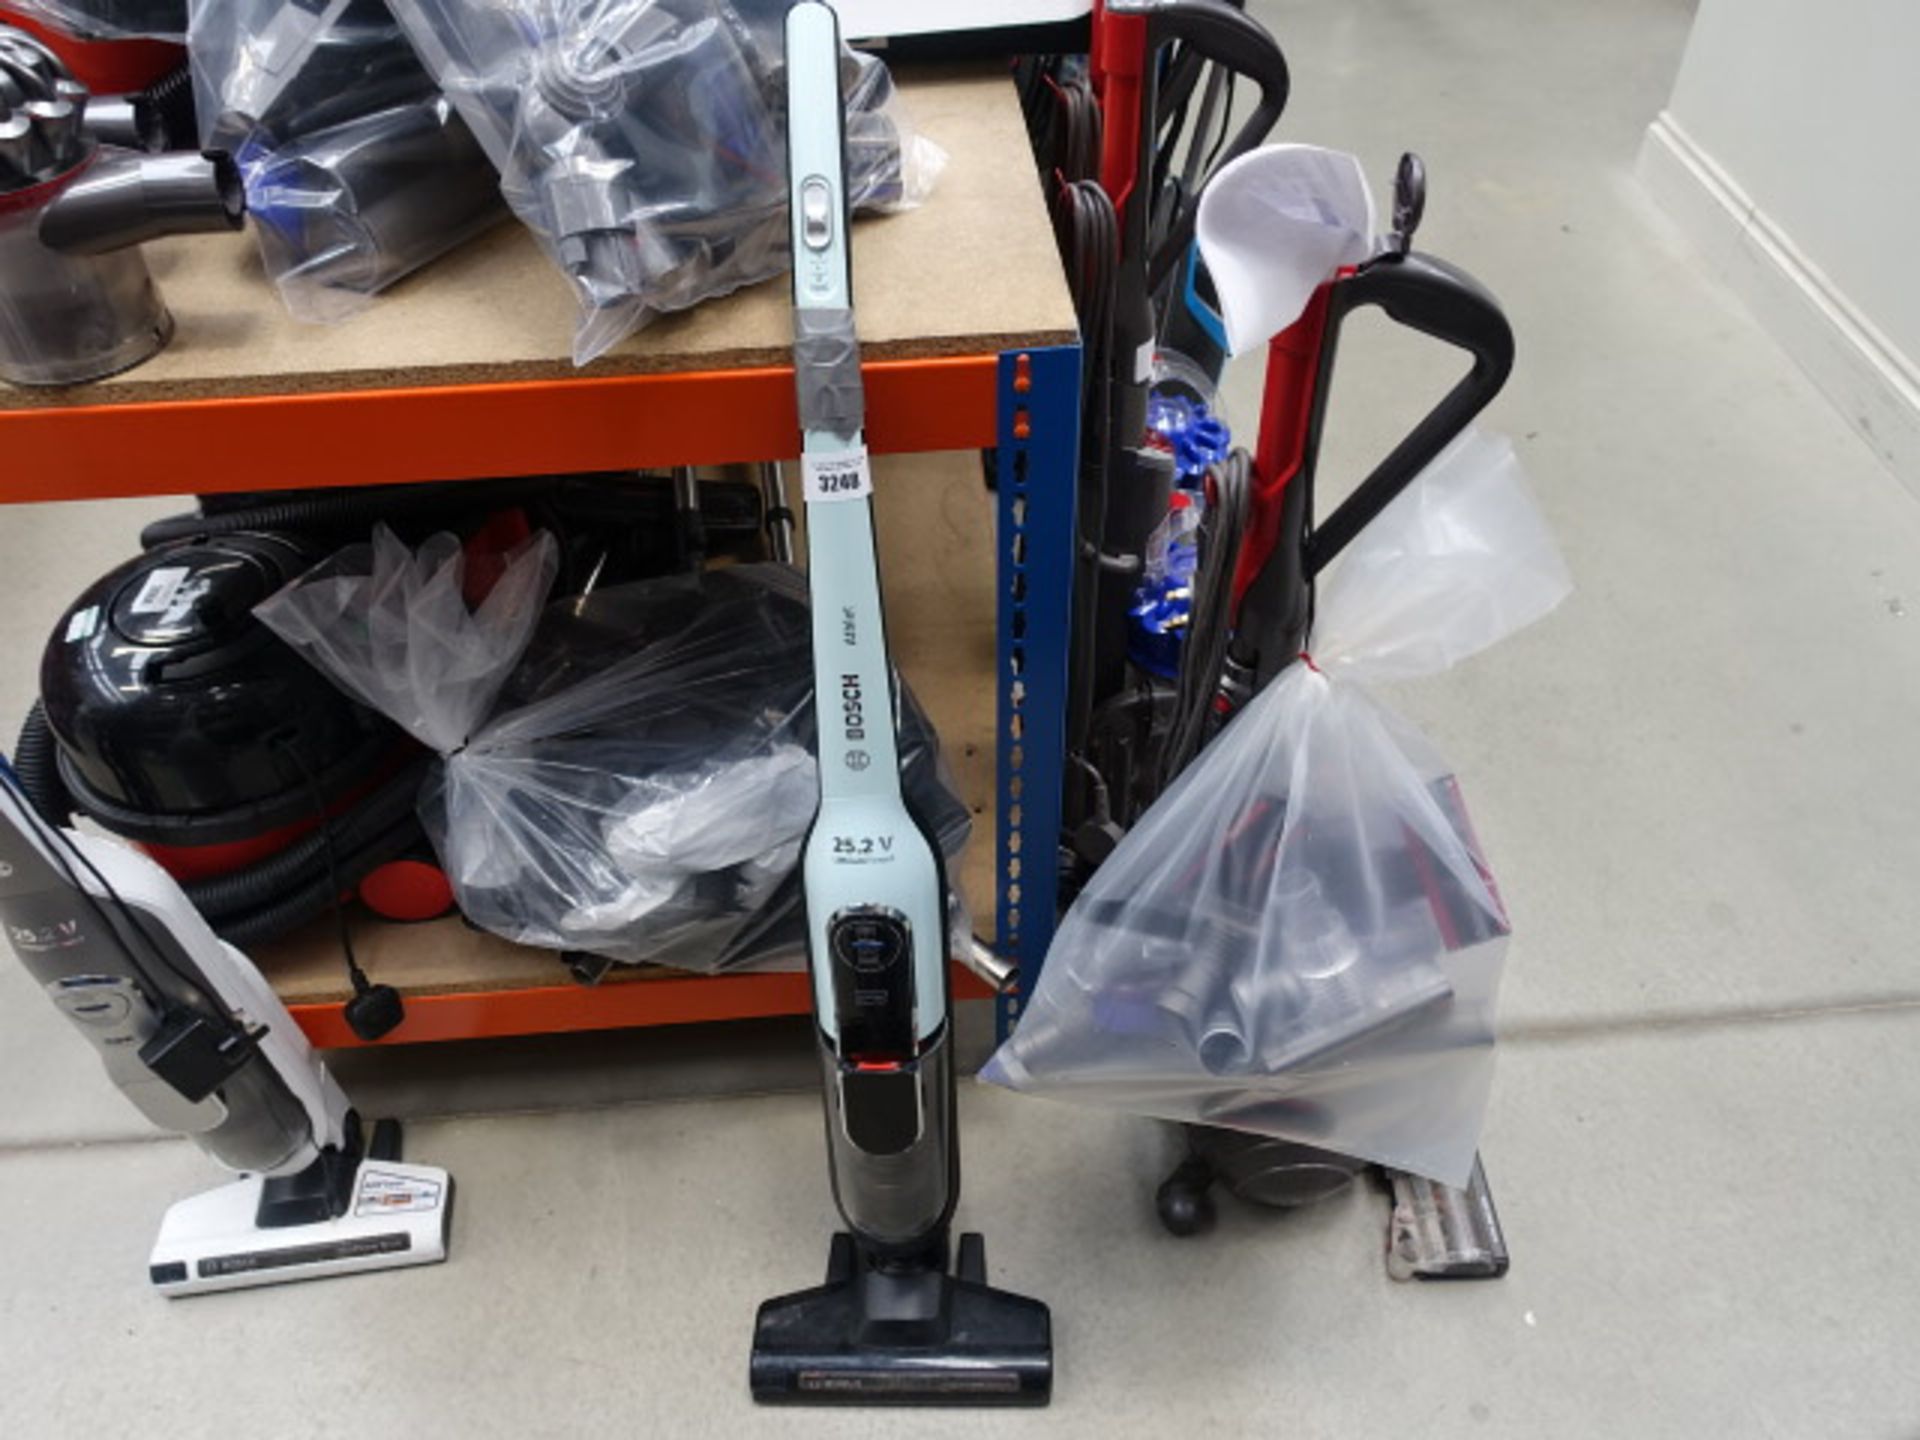 Upright cordless Bosch vacuum cleaner with broken handle plus no charger